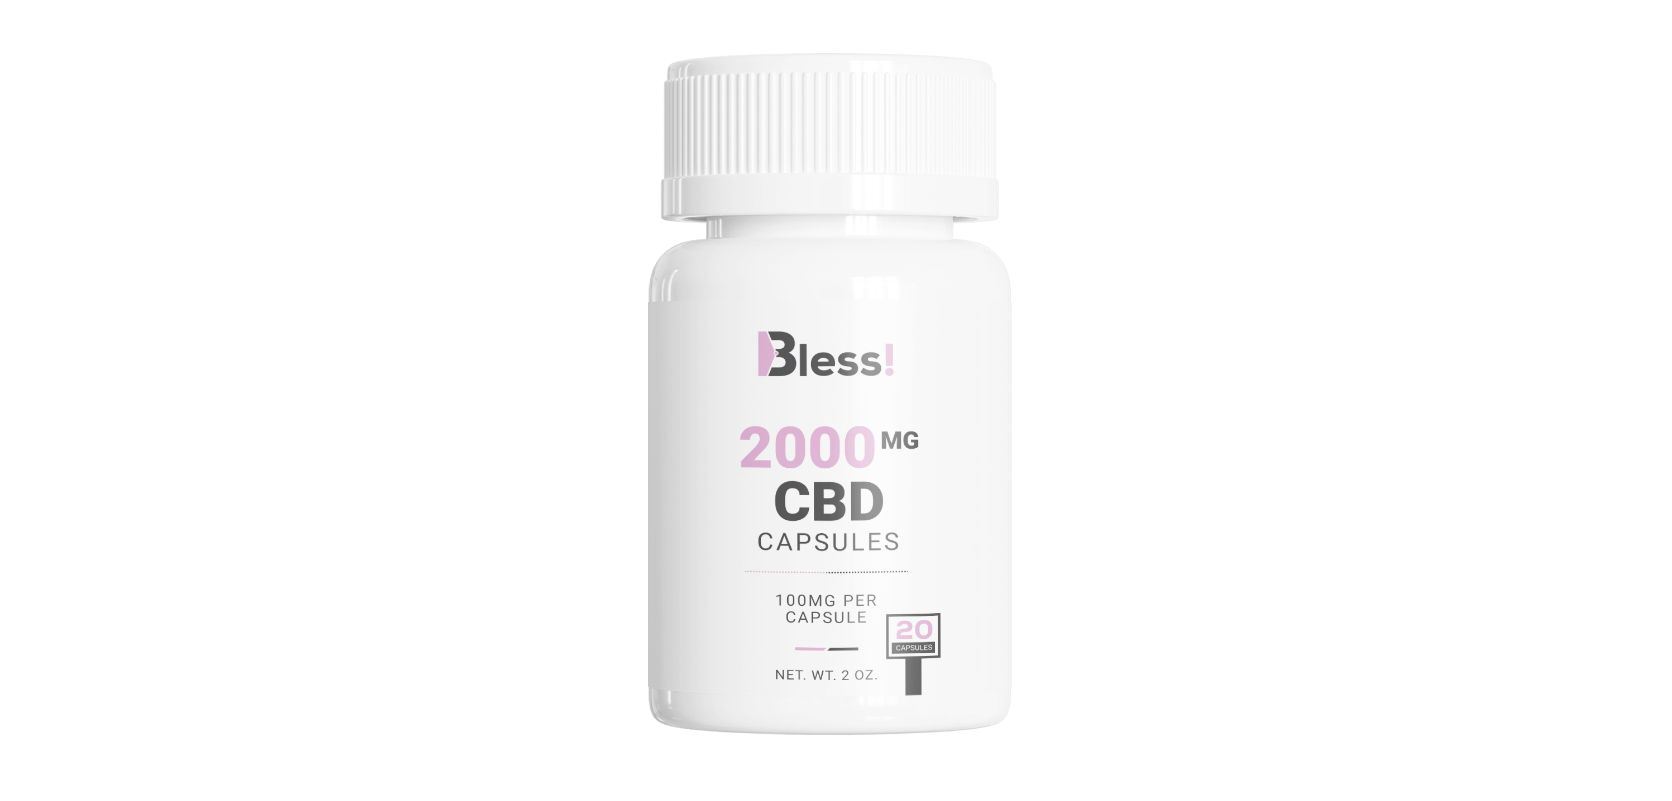 The Bless Capsules – 2000mg CBD Isolate are ideal if you are seeking a high-potency and fast-acting product. 